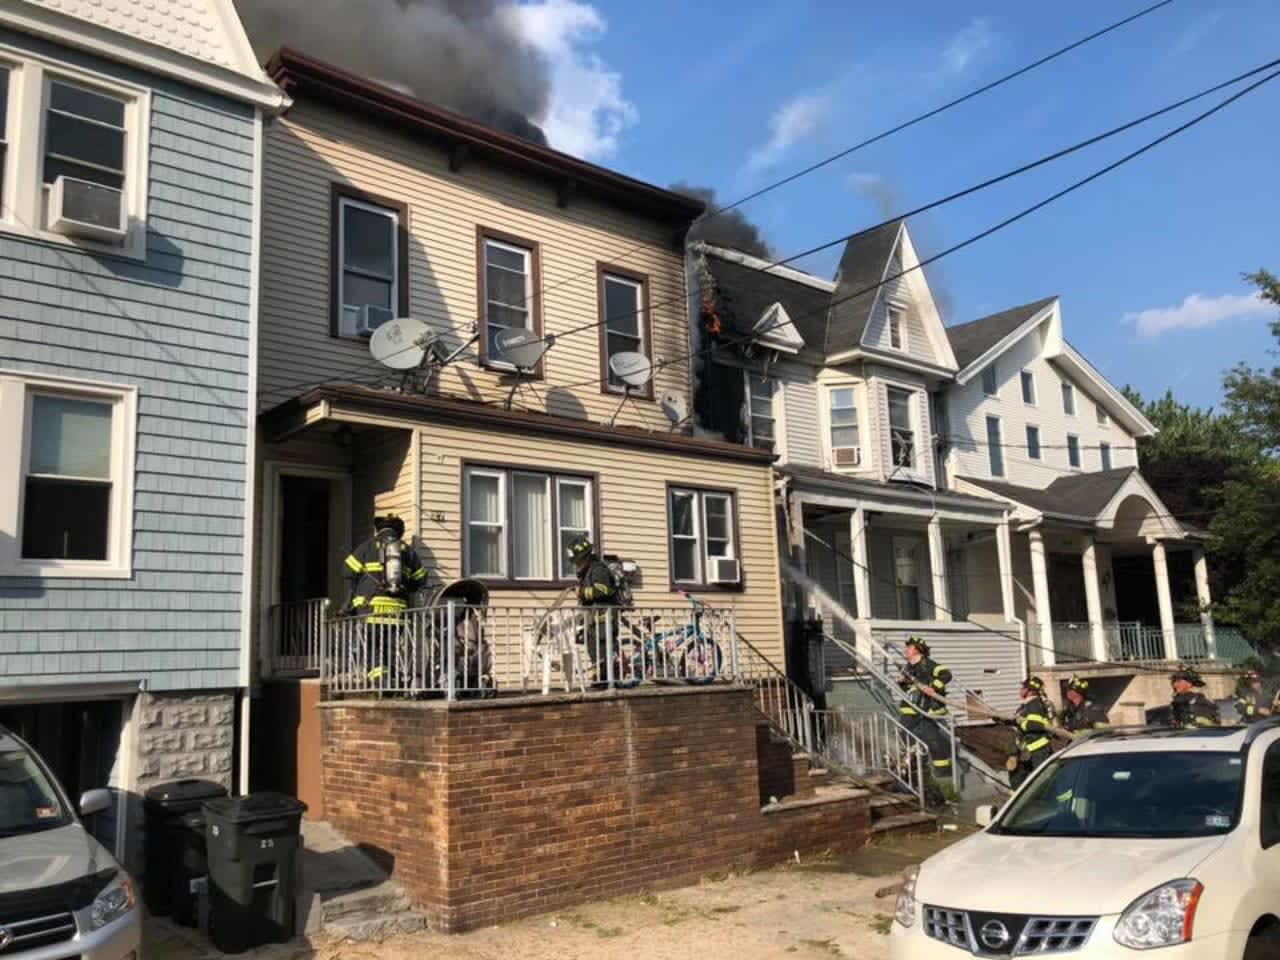 A fire in Bayonne left two homes heavily damaged Wednesday.